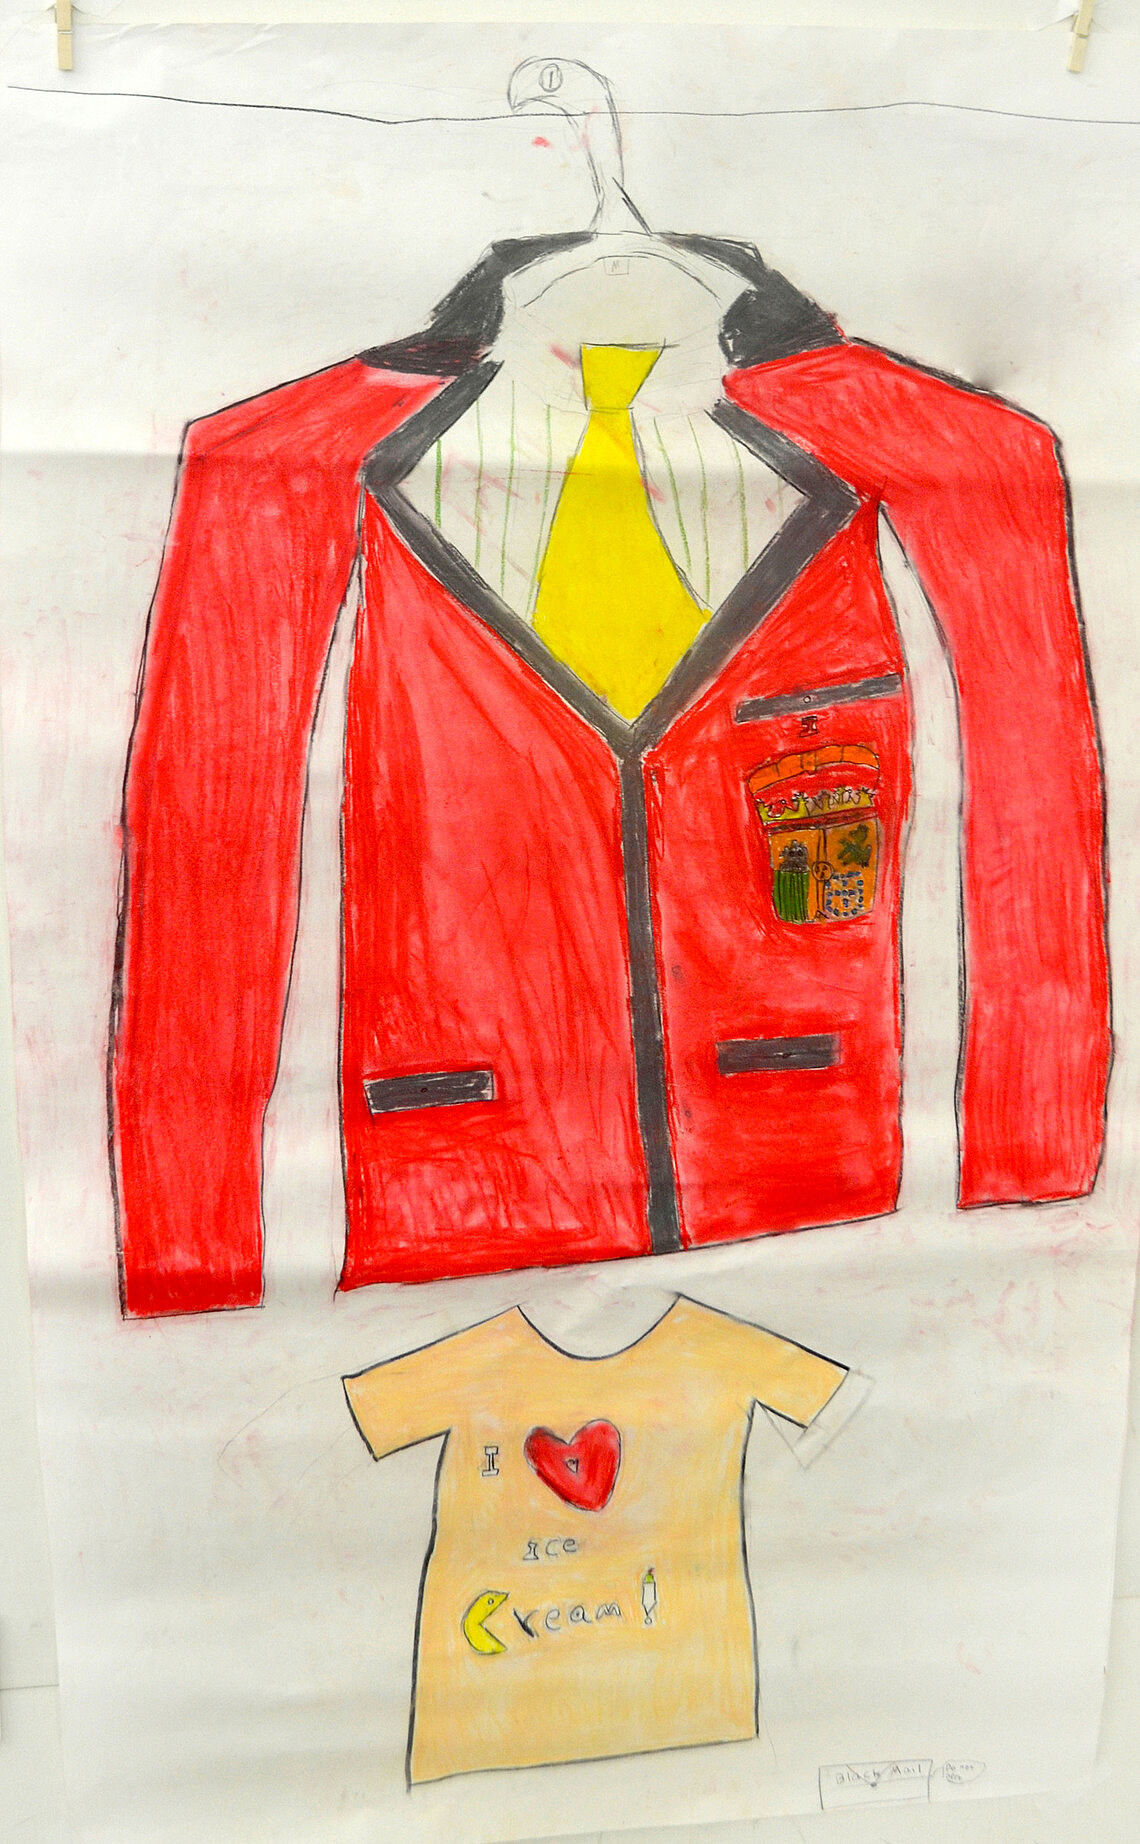 A drawing of a red jacket with a yellow tie.